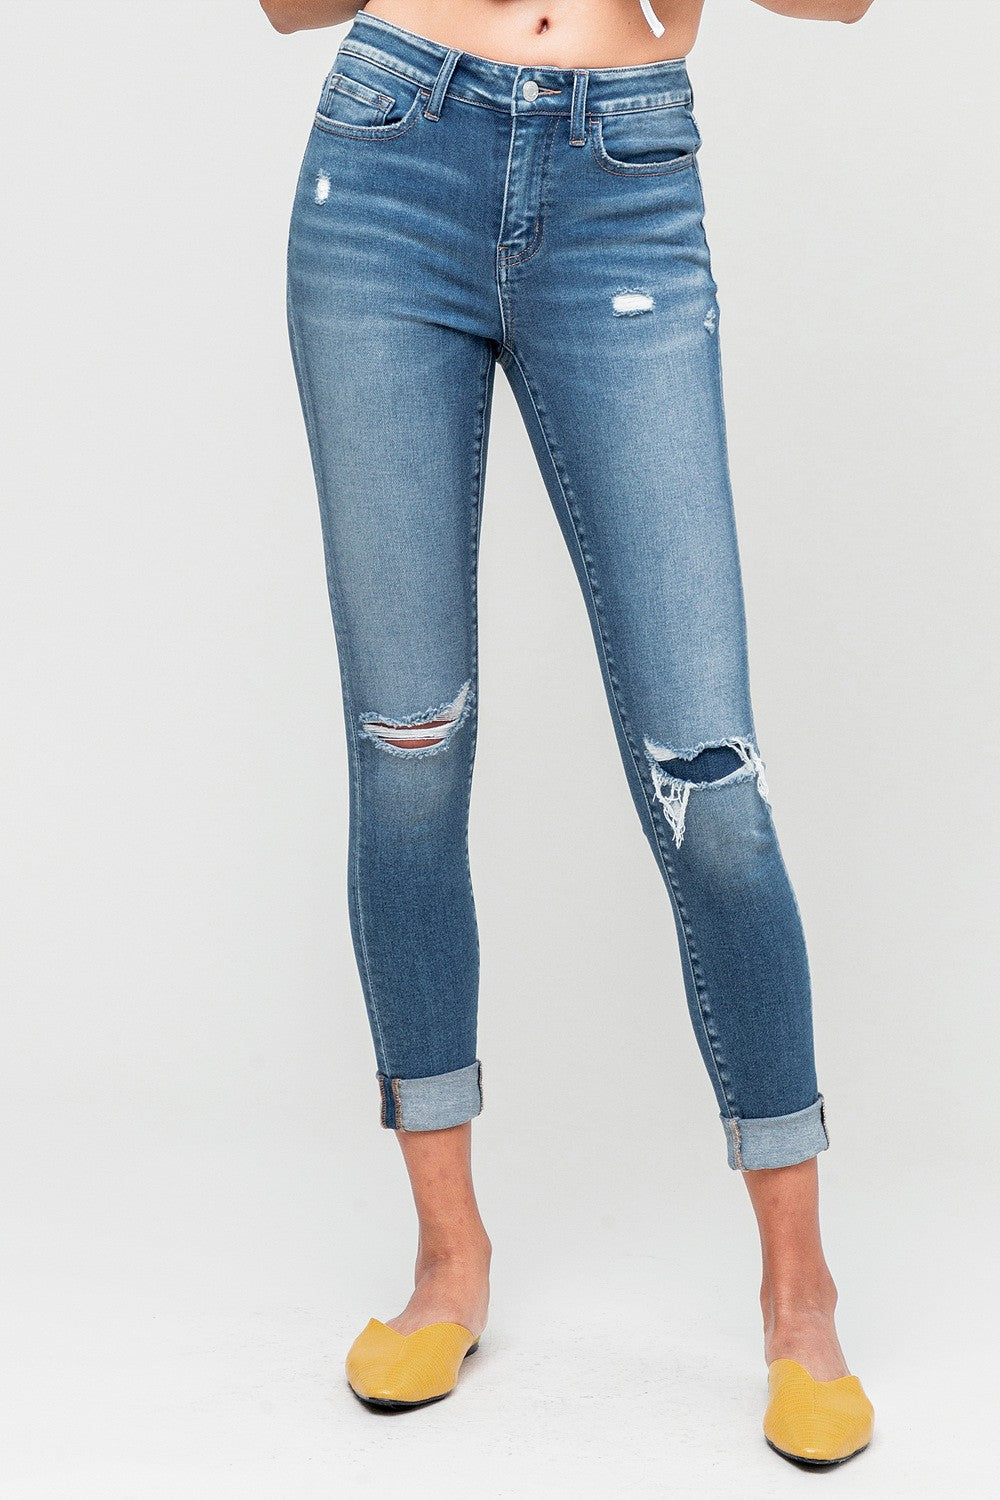 VERVET by Flying Monkey Mid Rise Patched Skinny Jeans